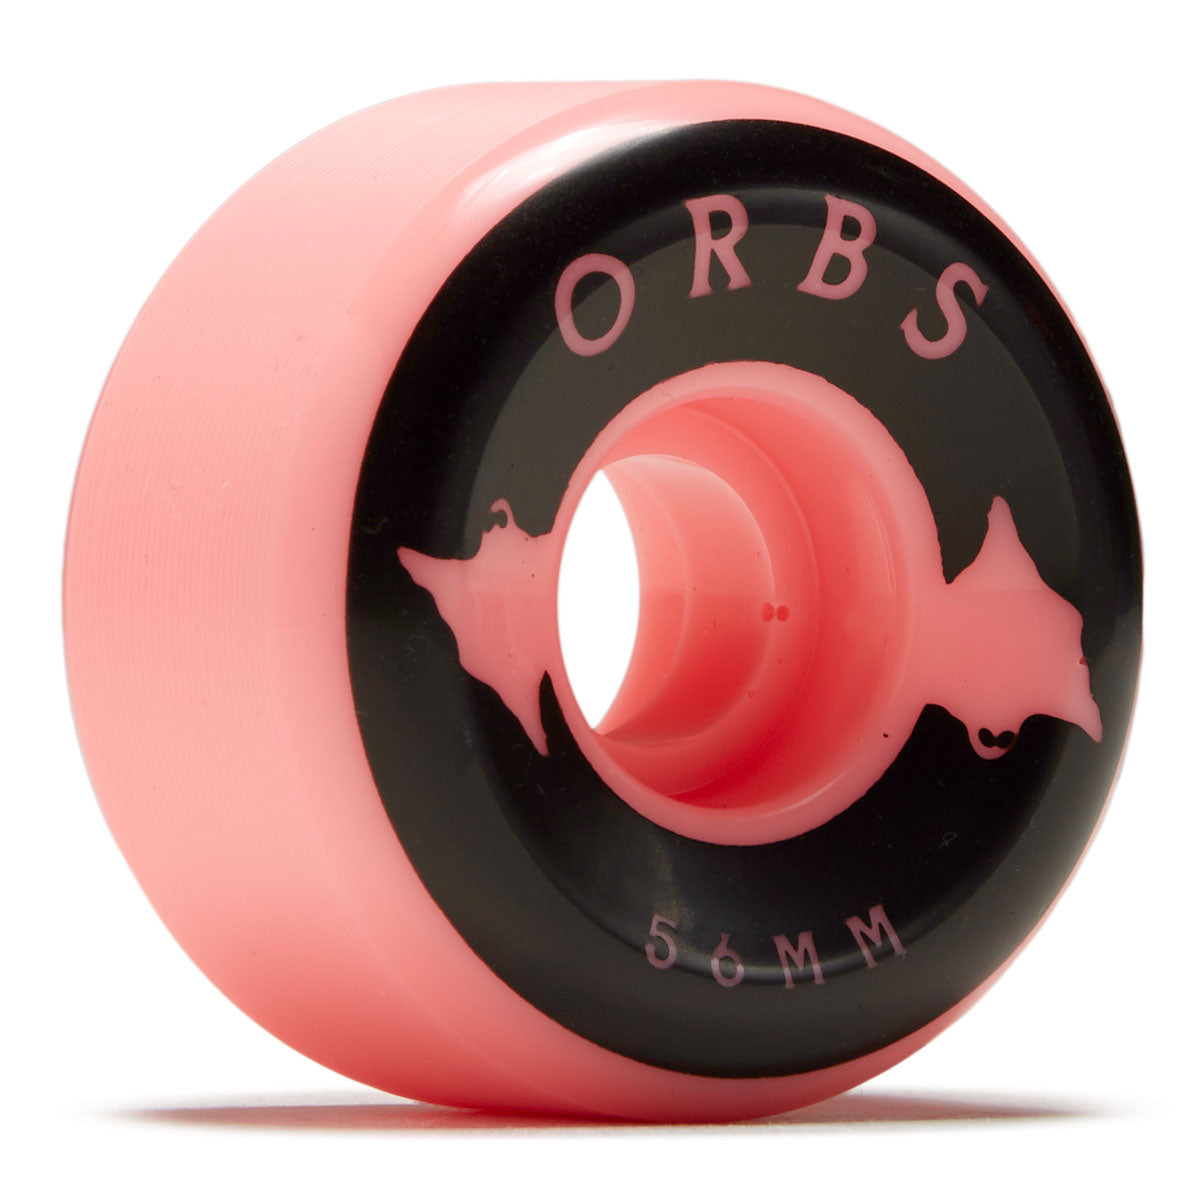 Welcome Orbs Specters Conical 99a Skateboard Wheels - Coral - 56mm image 1